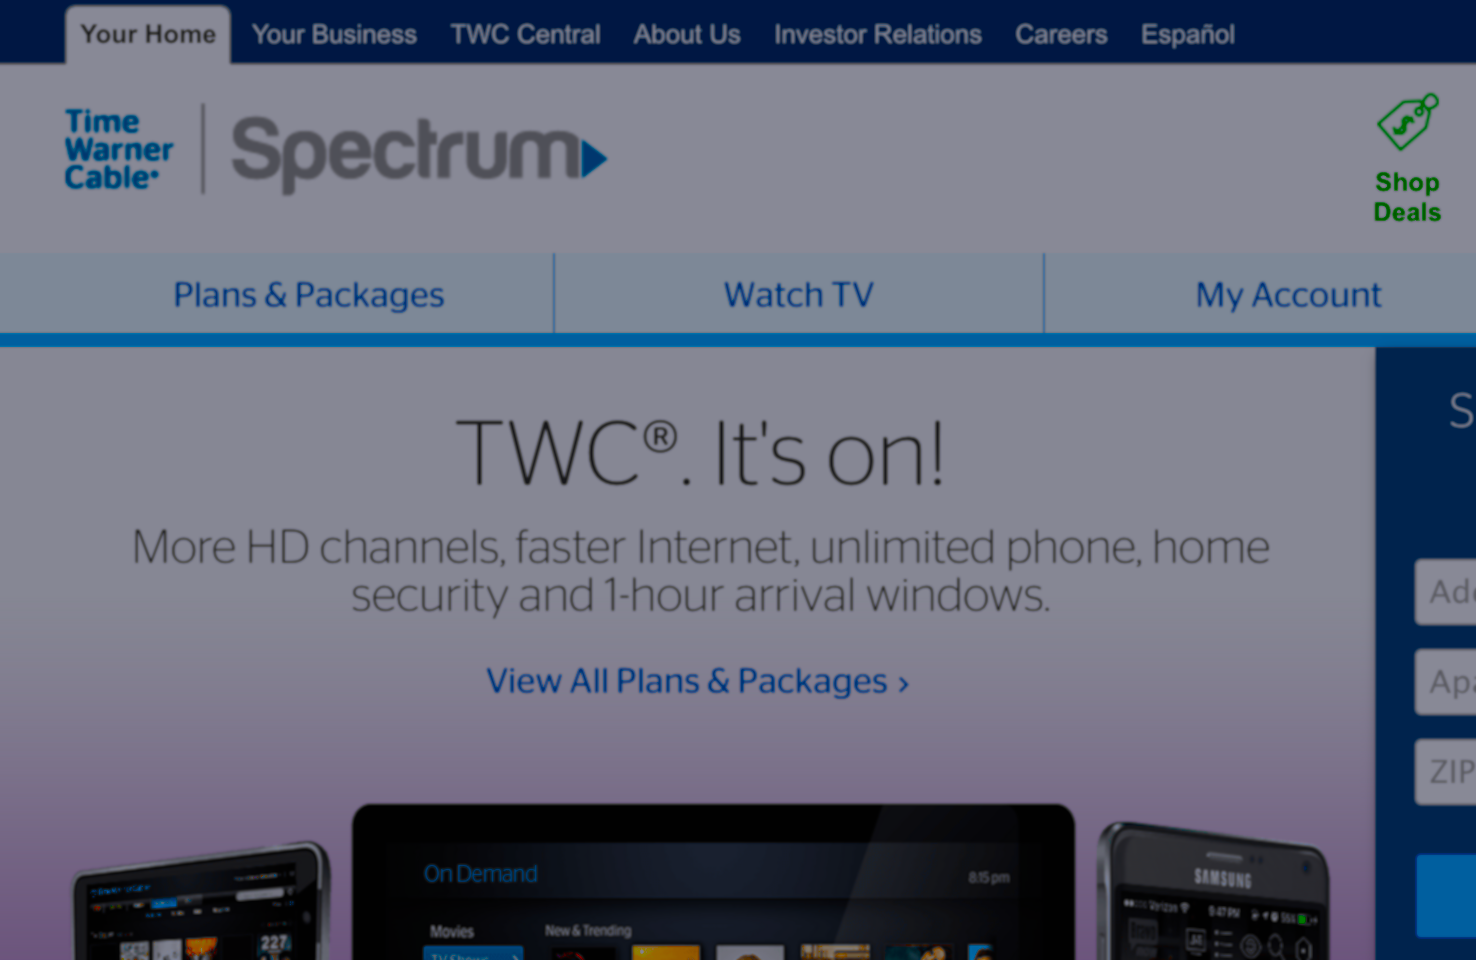 Charter/Time Warner Cable Tries To Defend “Broadcast TV” Fee; Says It’s All About Transparency